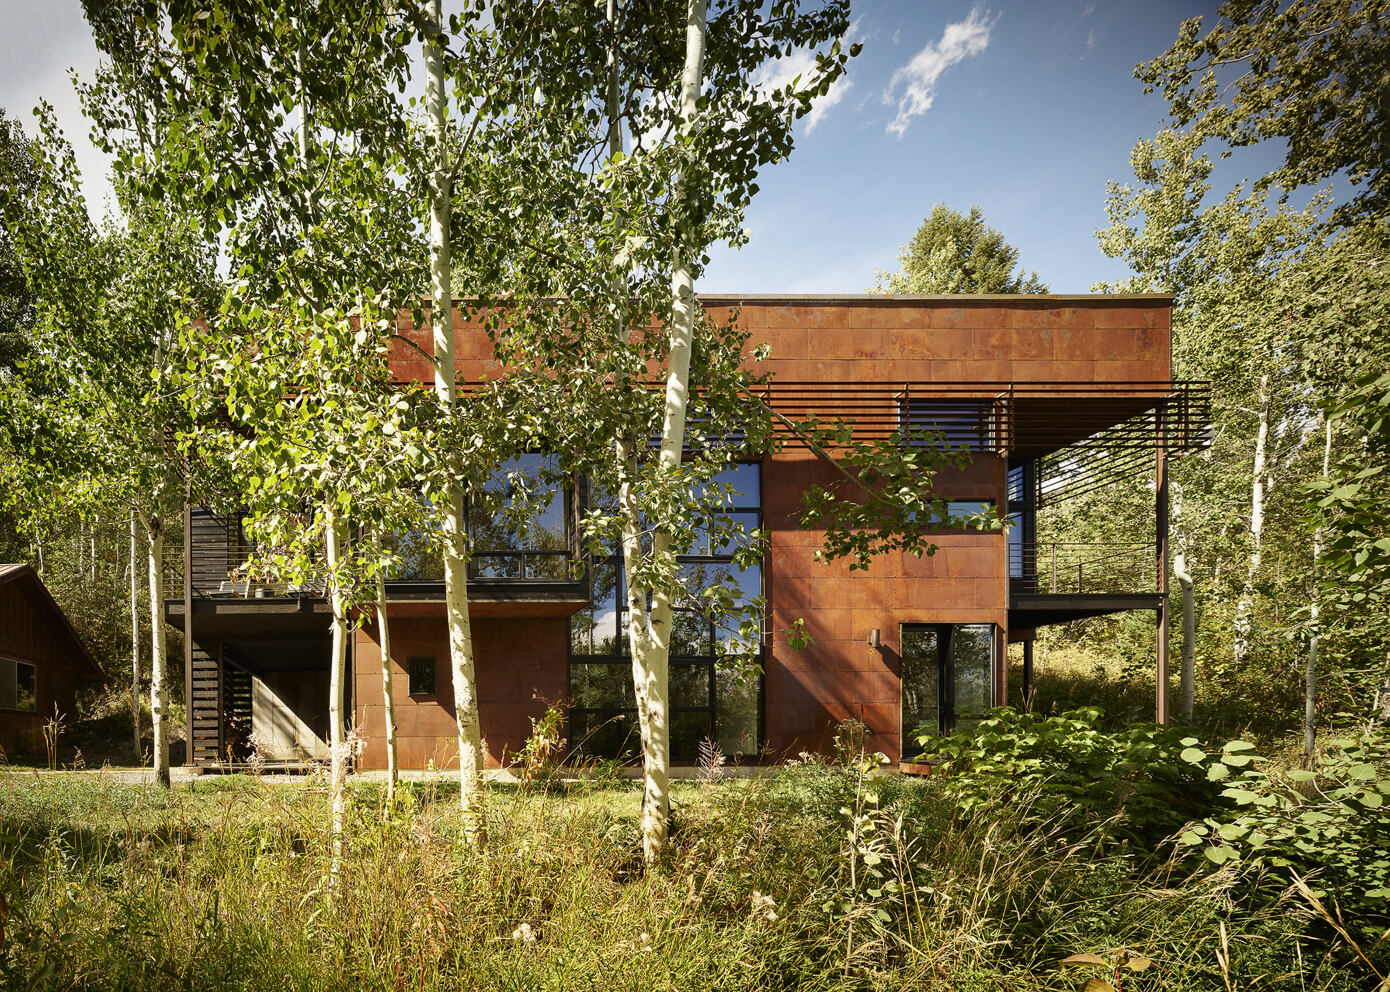 Paintbrush Residence: Embracing Nature in a Two-Story Wyoming Home